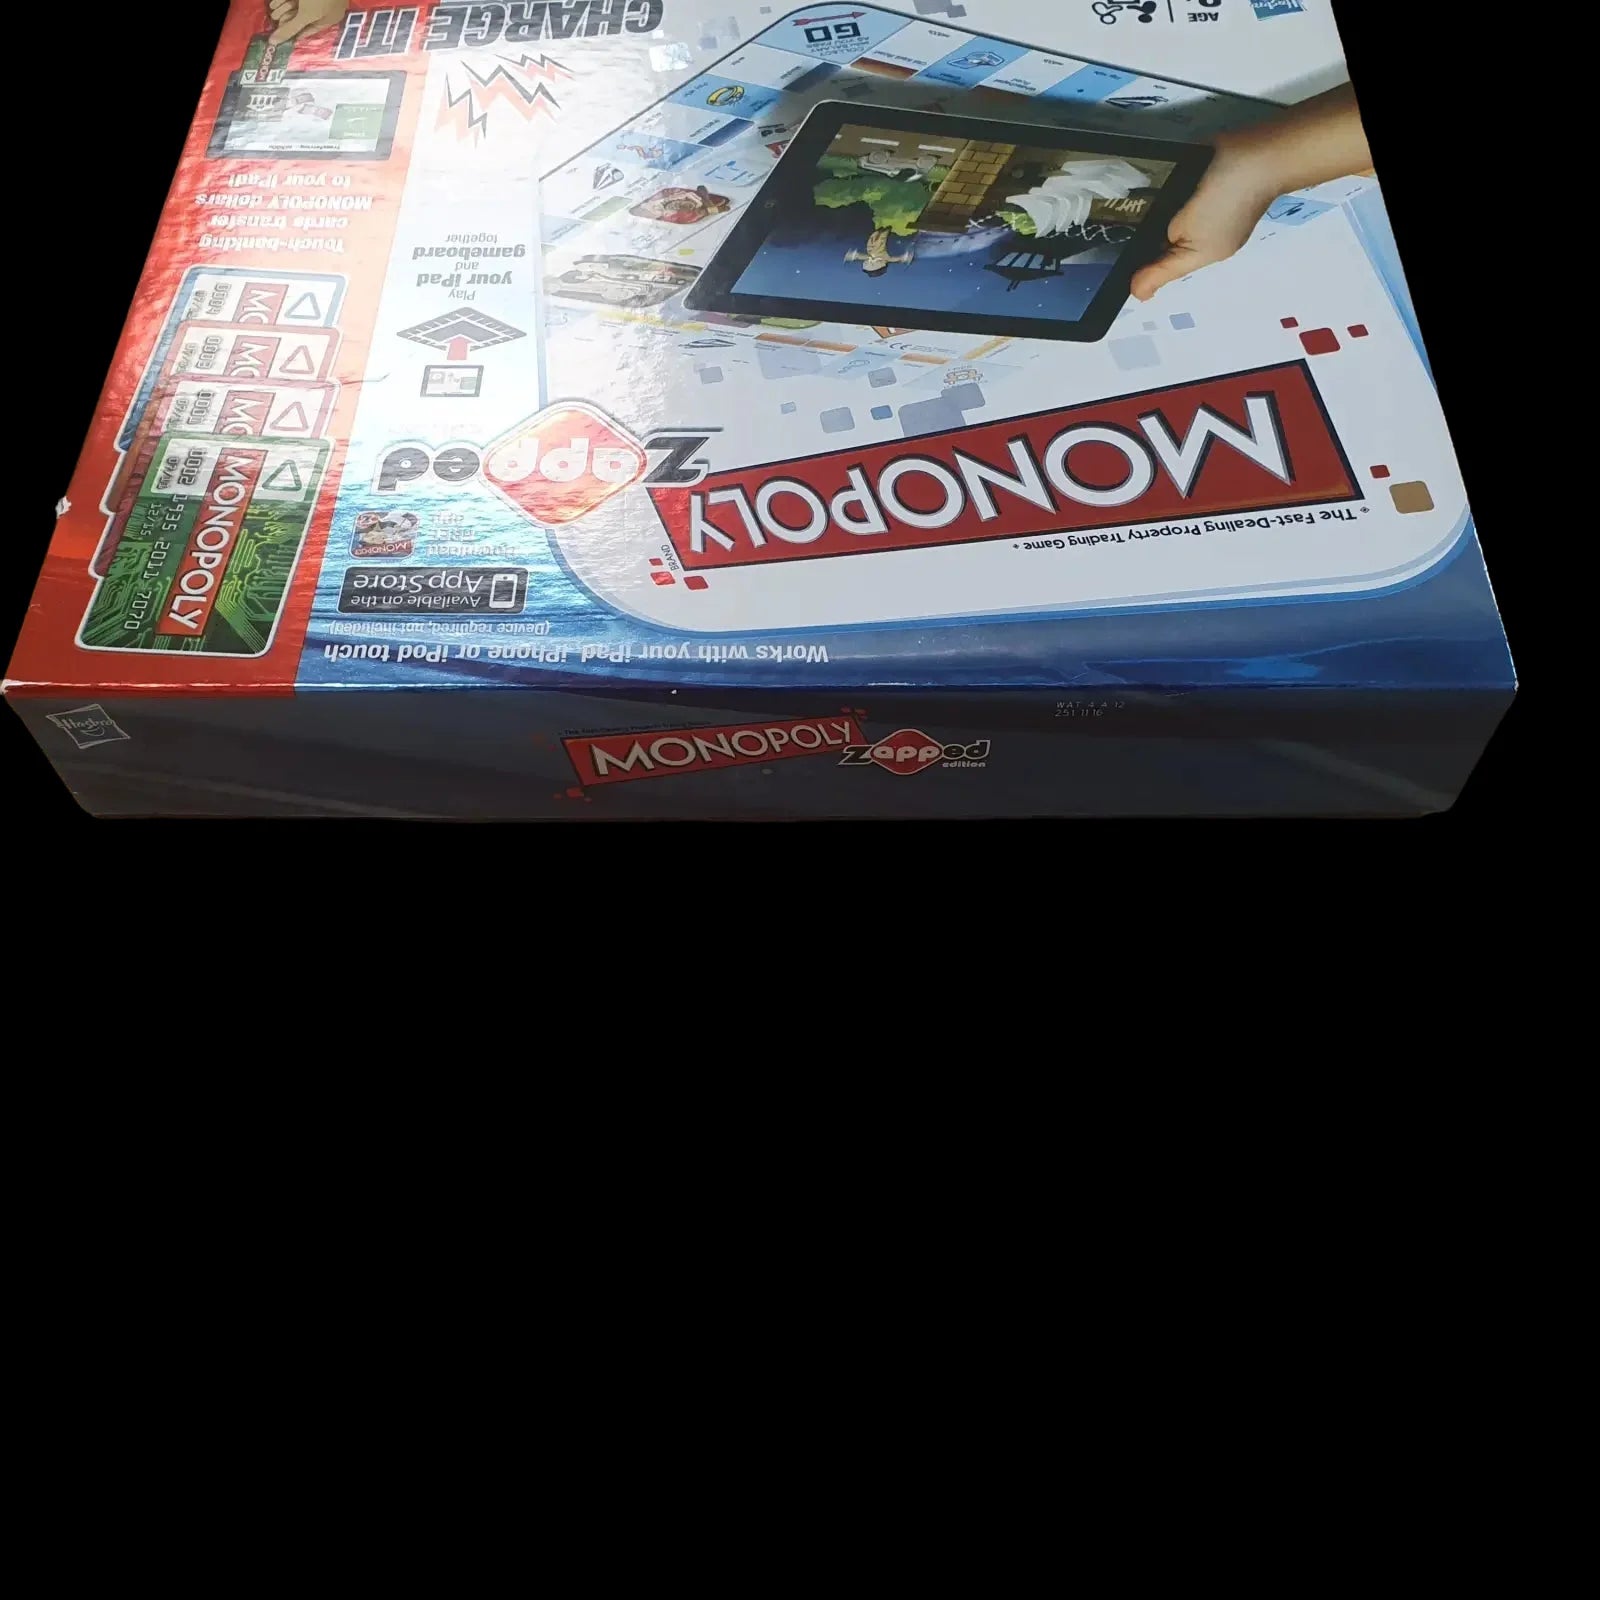 Hasbro Monopoly Zapped Edition Boxed Board Game Ipad Iphone